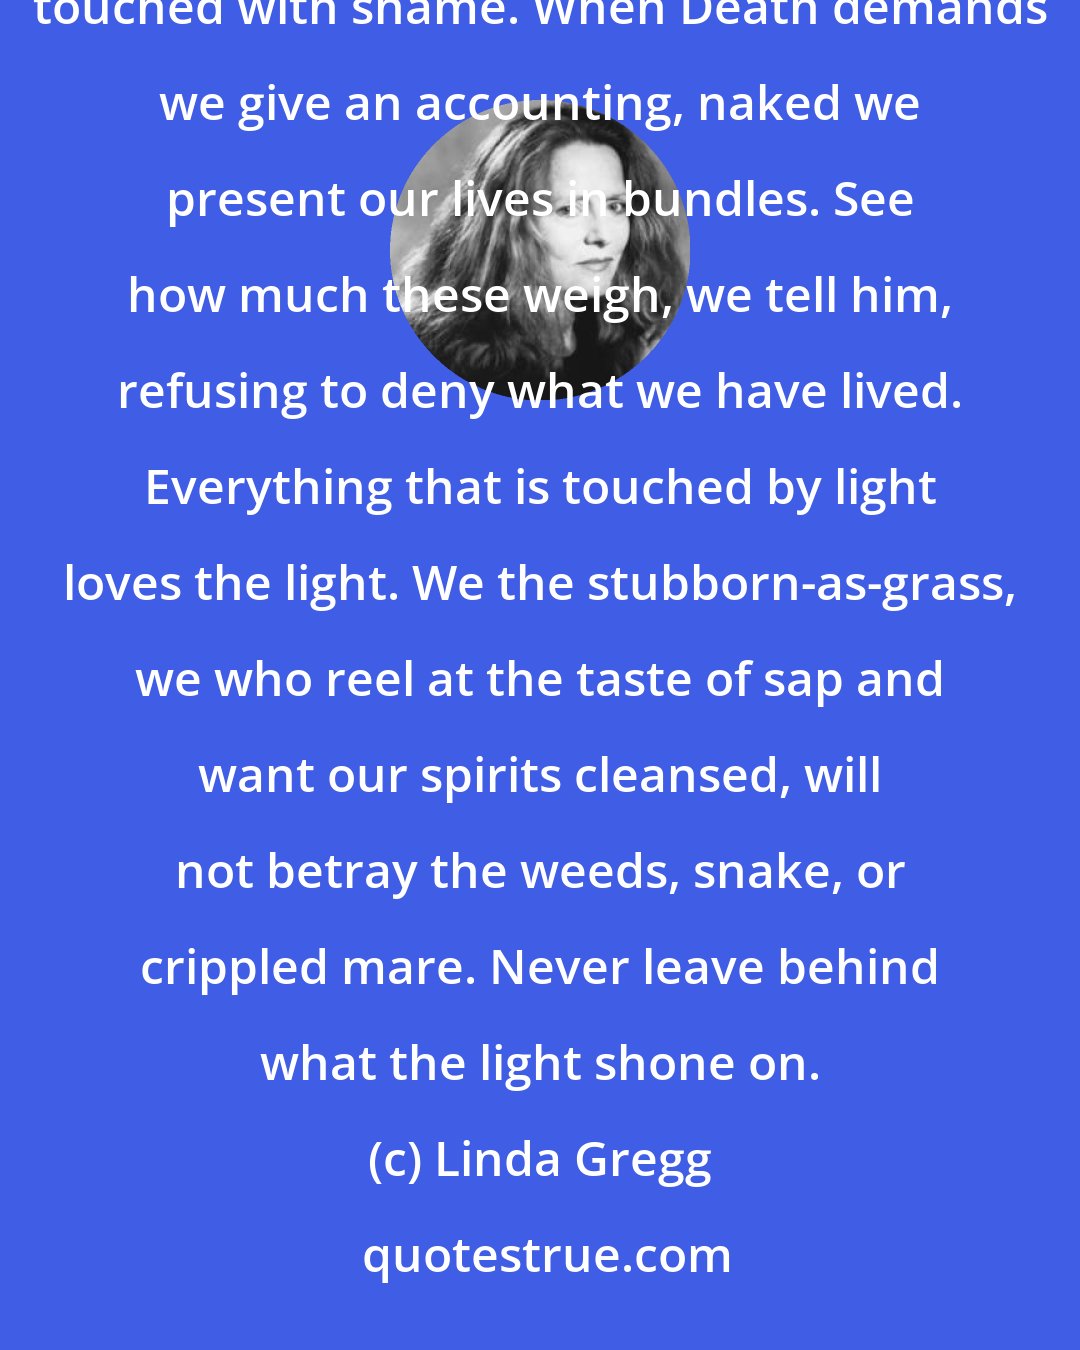 Linda Gregg: When death comes, we take off our clothes and gather everything we left behind: what is dark, broken, touched with shame. When Death demands we give an accounting, naked we present our lives in bundles. See how much these weigh, we tell him, refusing to deny what we have lived. Everything that is touched by light loves the light. We the stubborn-as-grass, we who reel at the taste of sap and want our spirits cleansed, will not betray the weeds, snake, or crippled mare. Never leave behind what the light shone on.